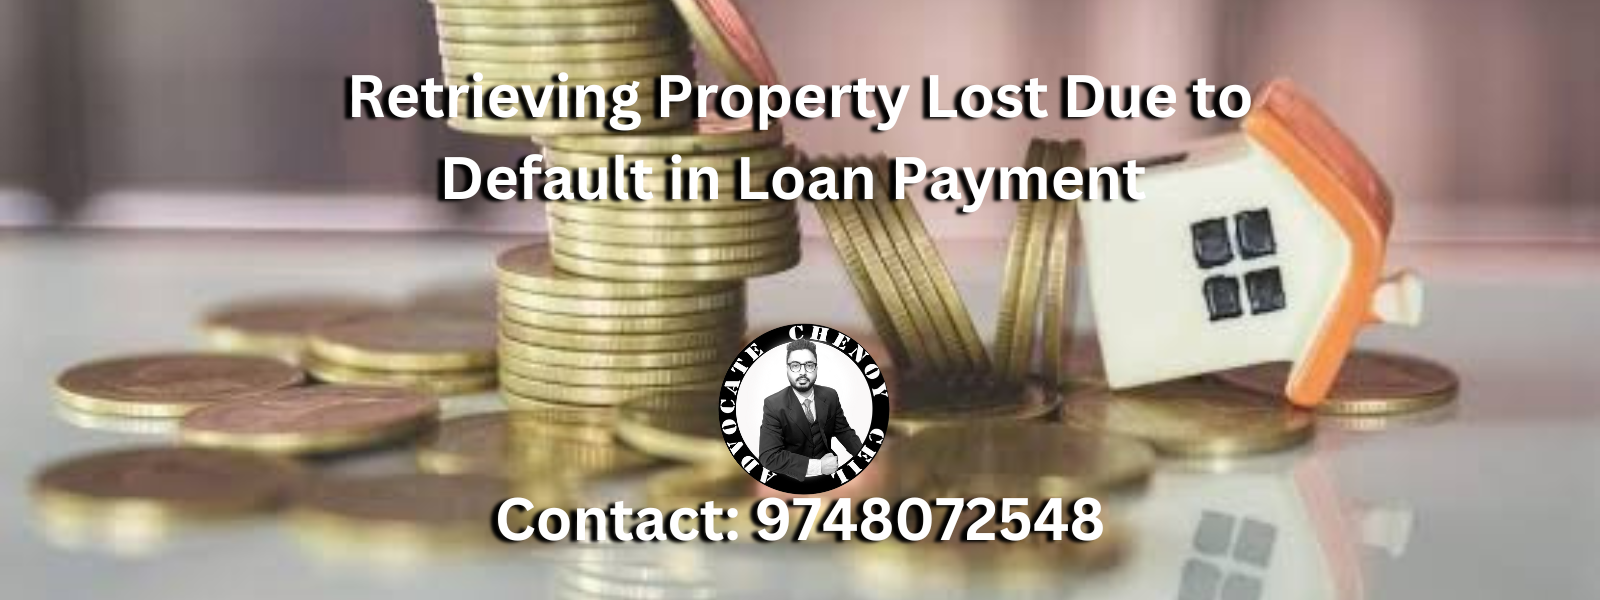 Retrieve Property Lost due to Default in Home Loan